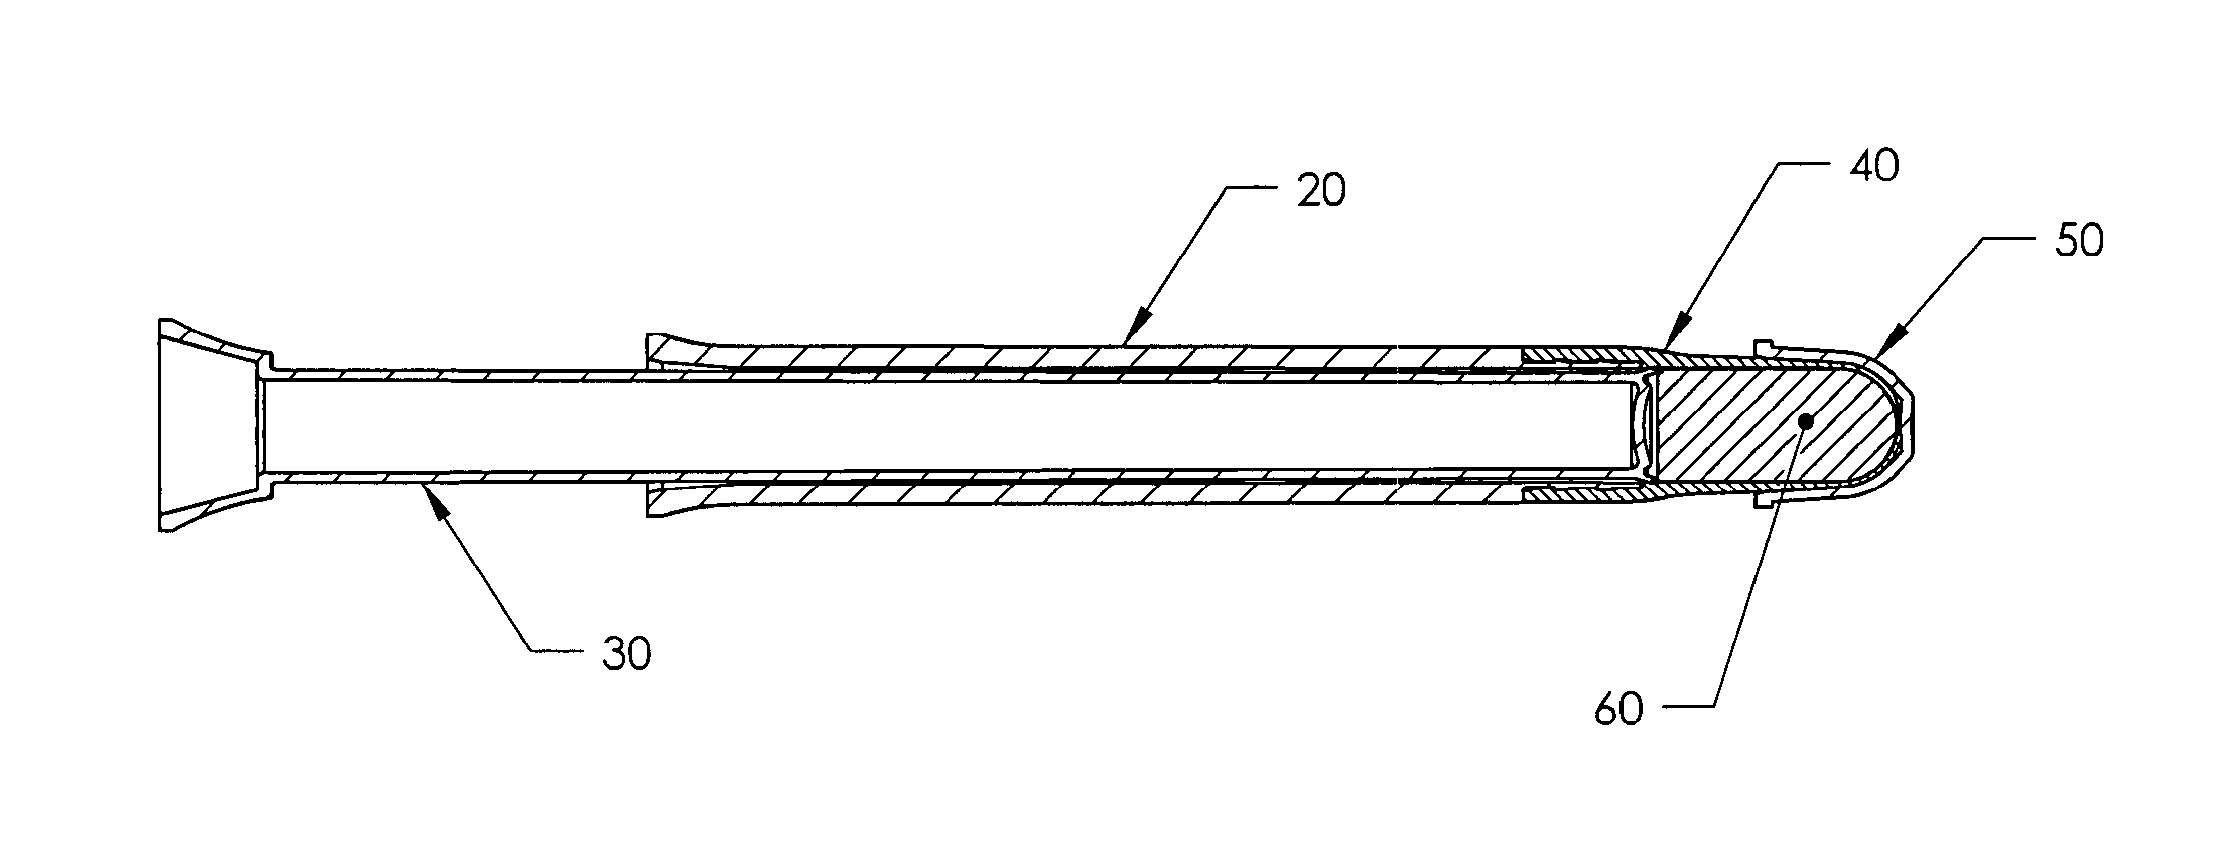 Applicator for applying powder formulations and uses thereof